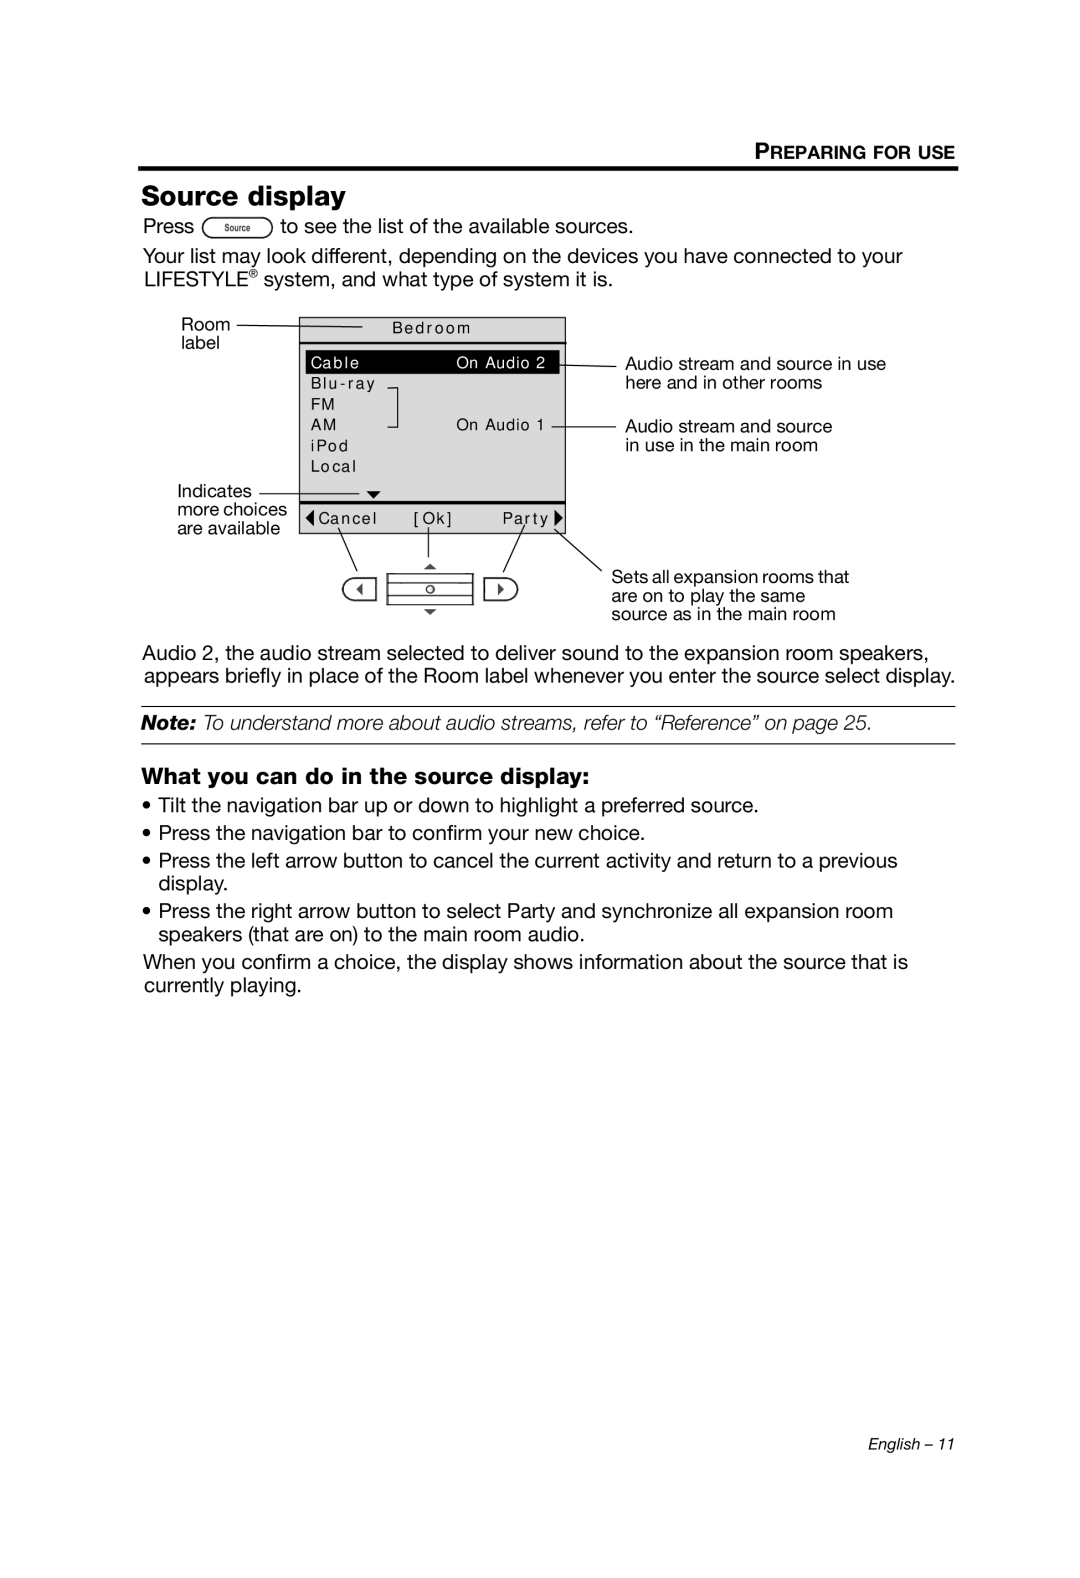 Bose Personal Music Center III, PMCIII manual Source display, What you can do in the source display 